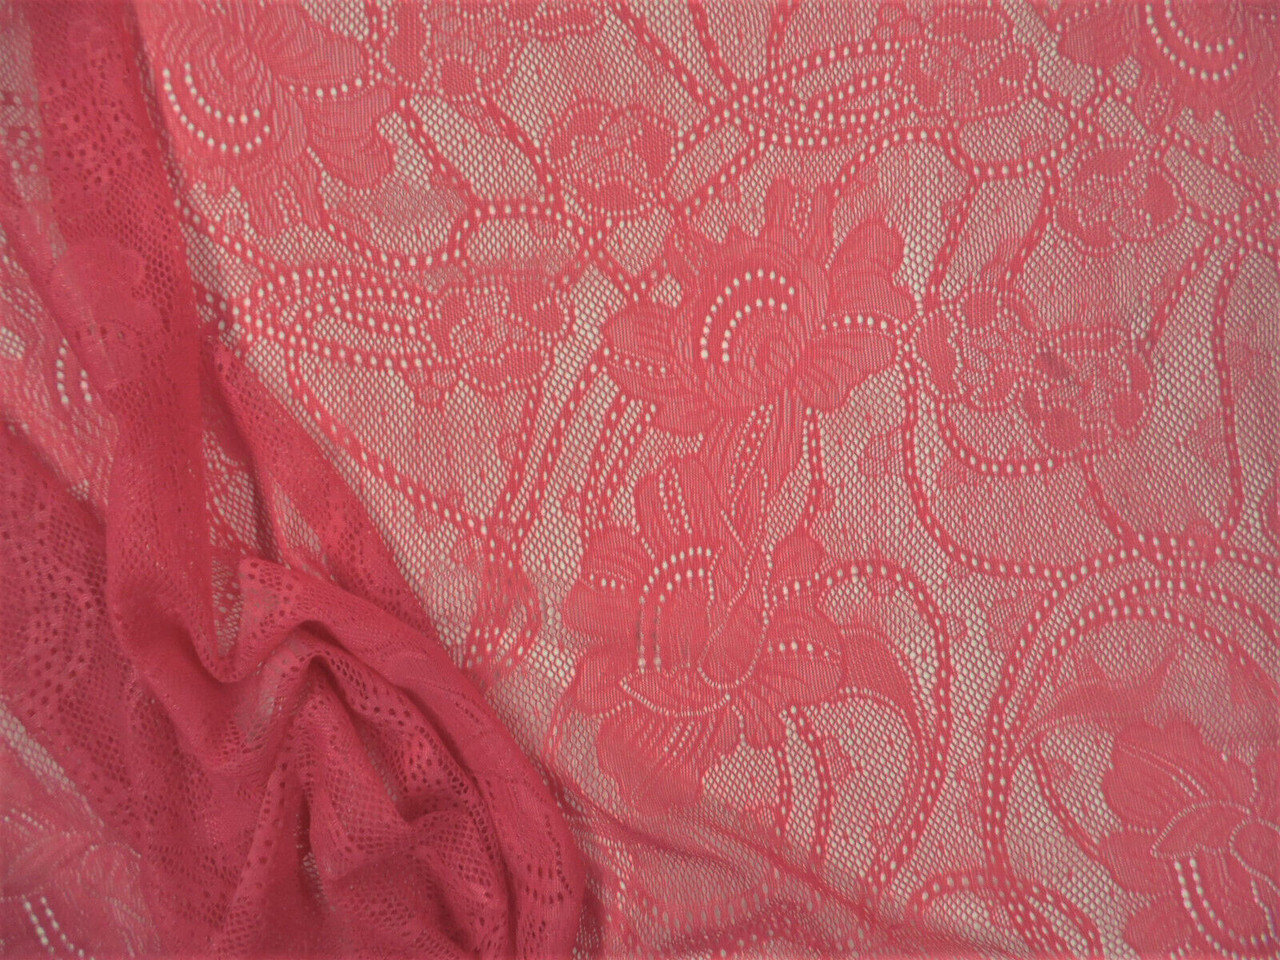 Stretch Lace Apparel Fabric Sheer Floral Dark Watermelon Pink CC201